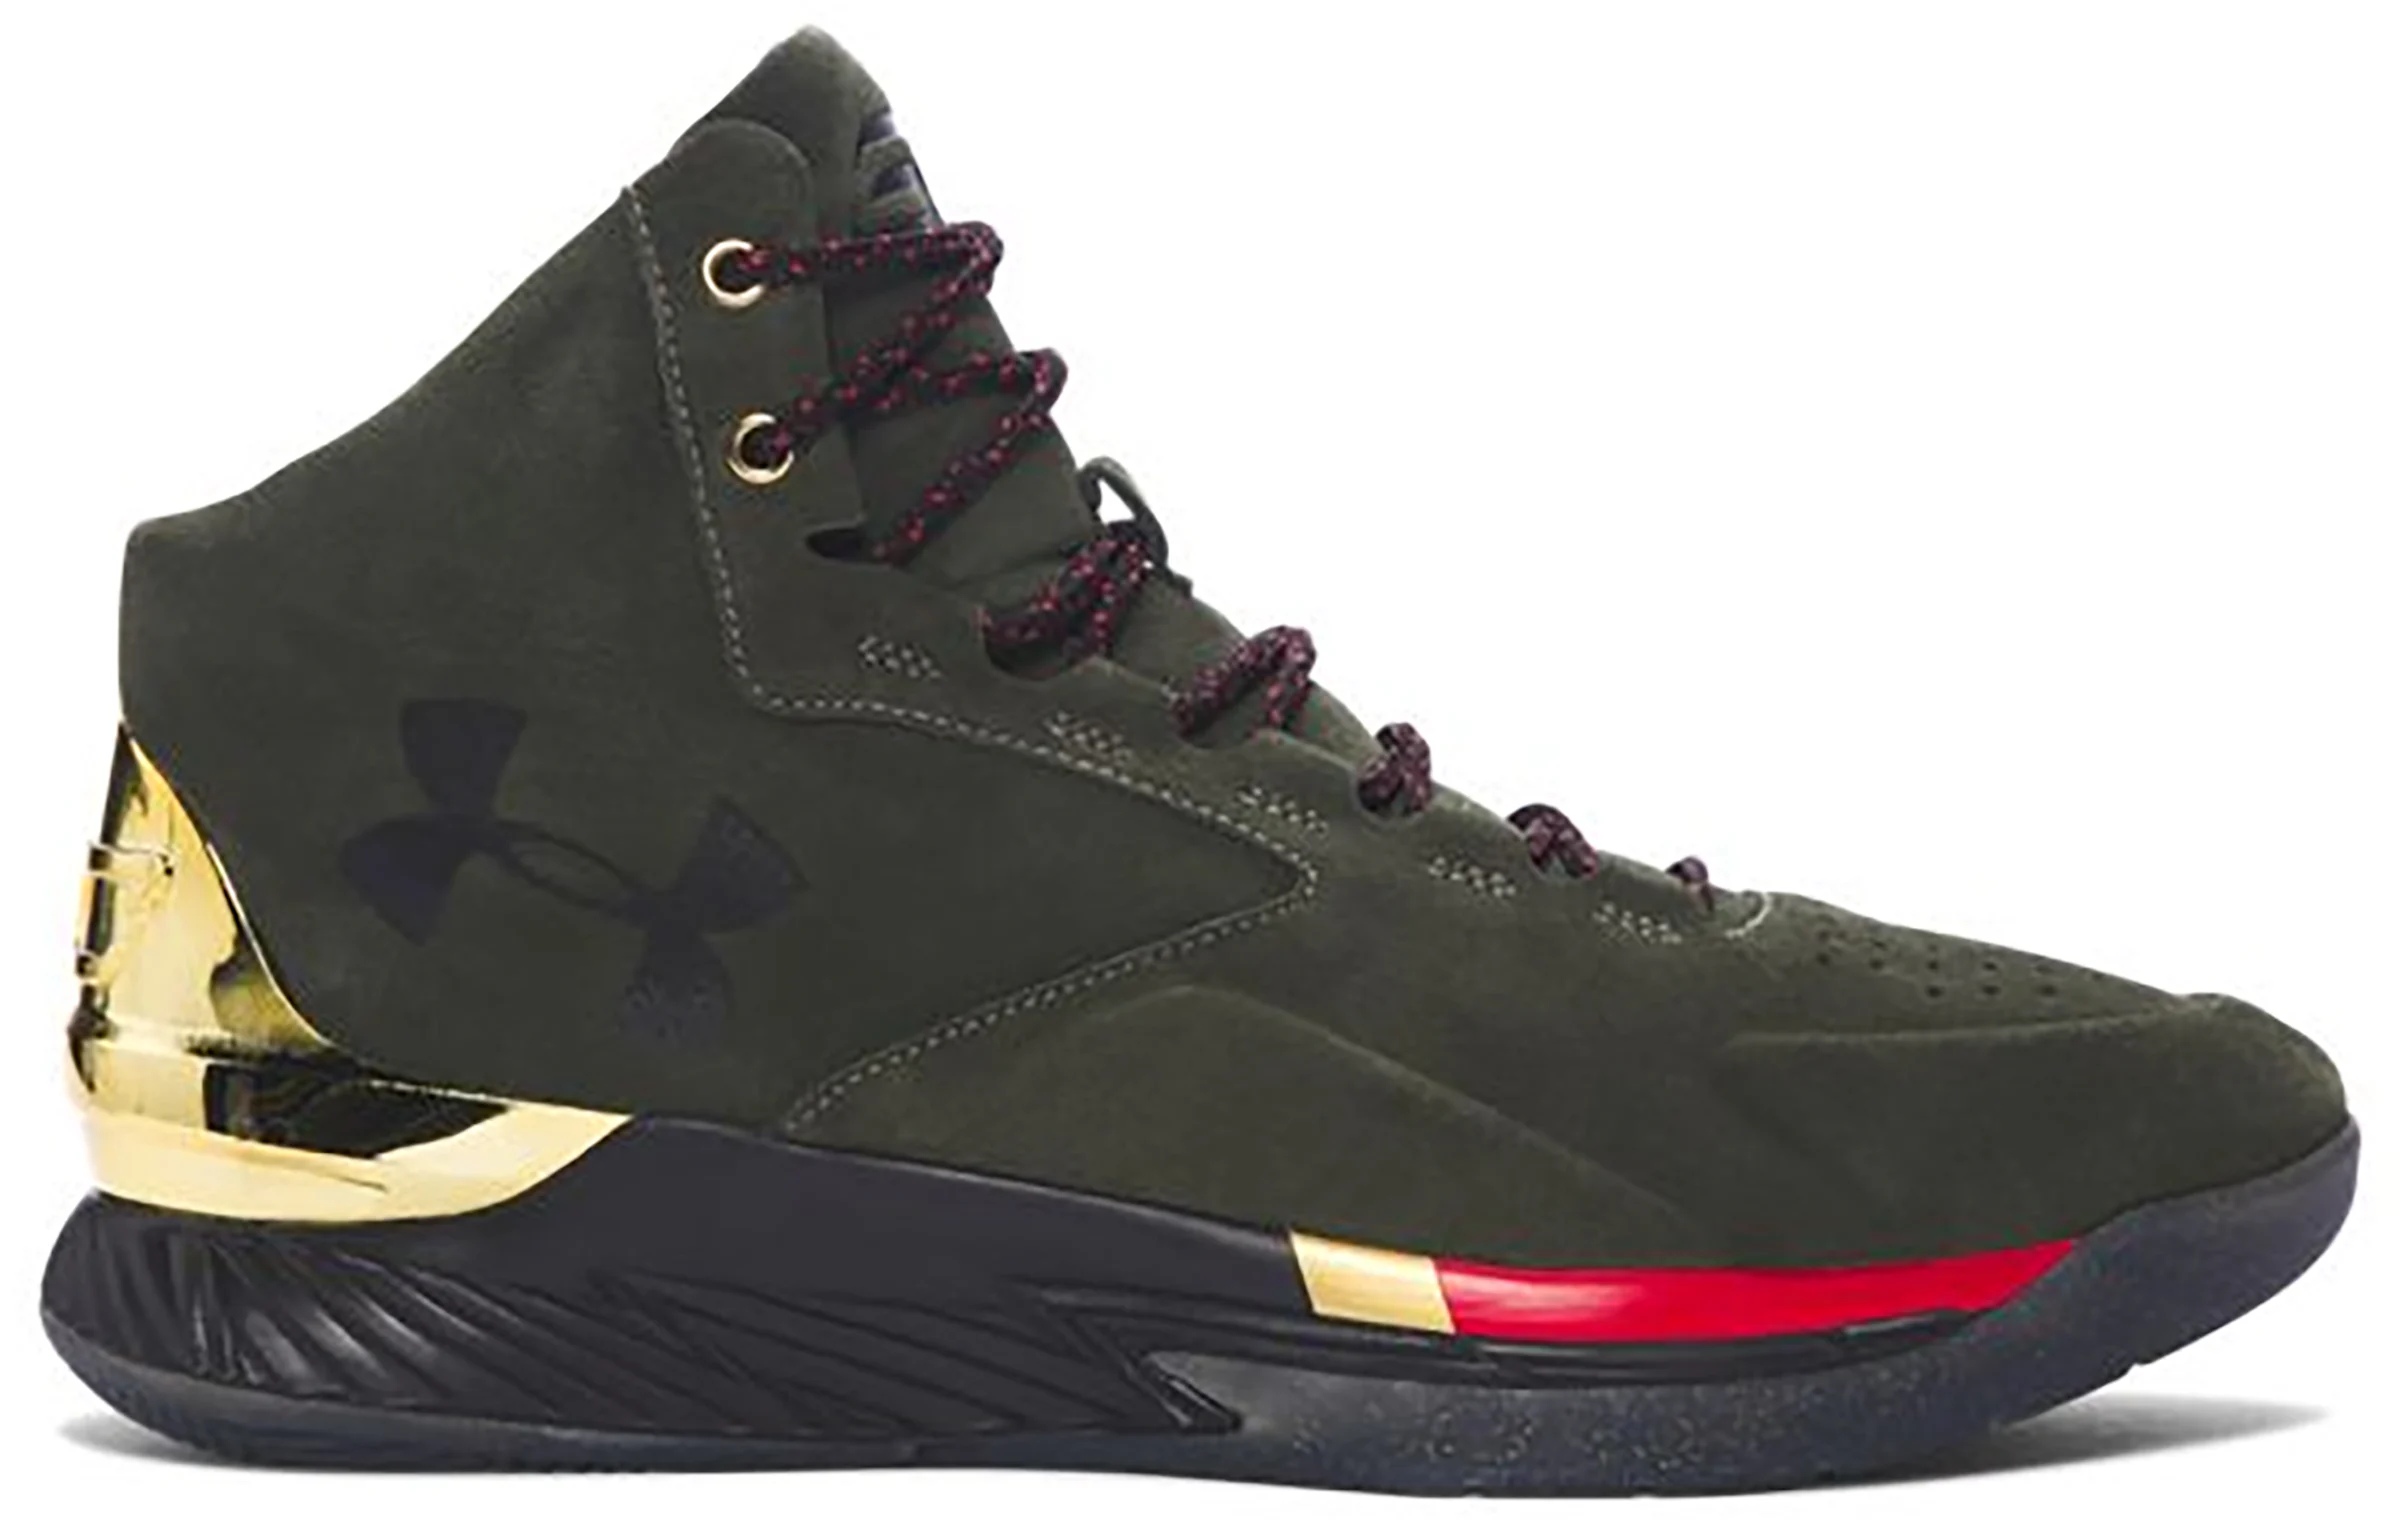 Under Armour Curry 1 Lux Mid Suede Downtown Green Men's - 1296617-330 - US